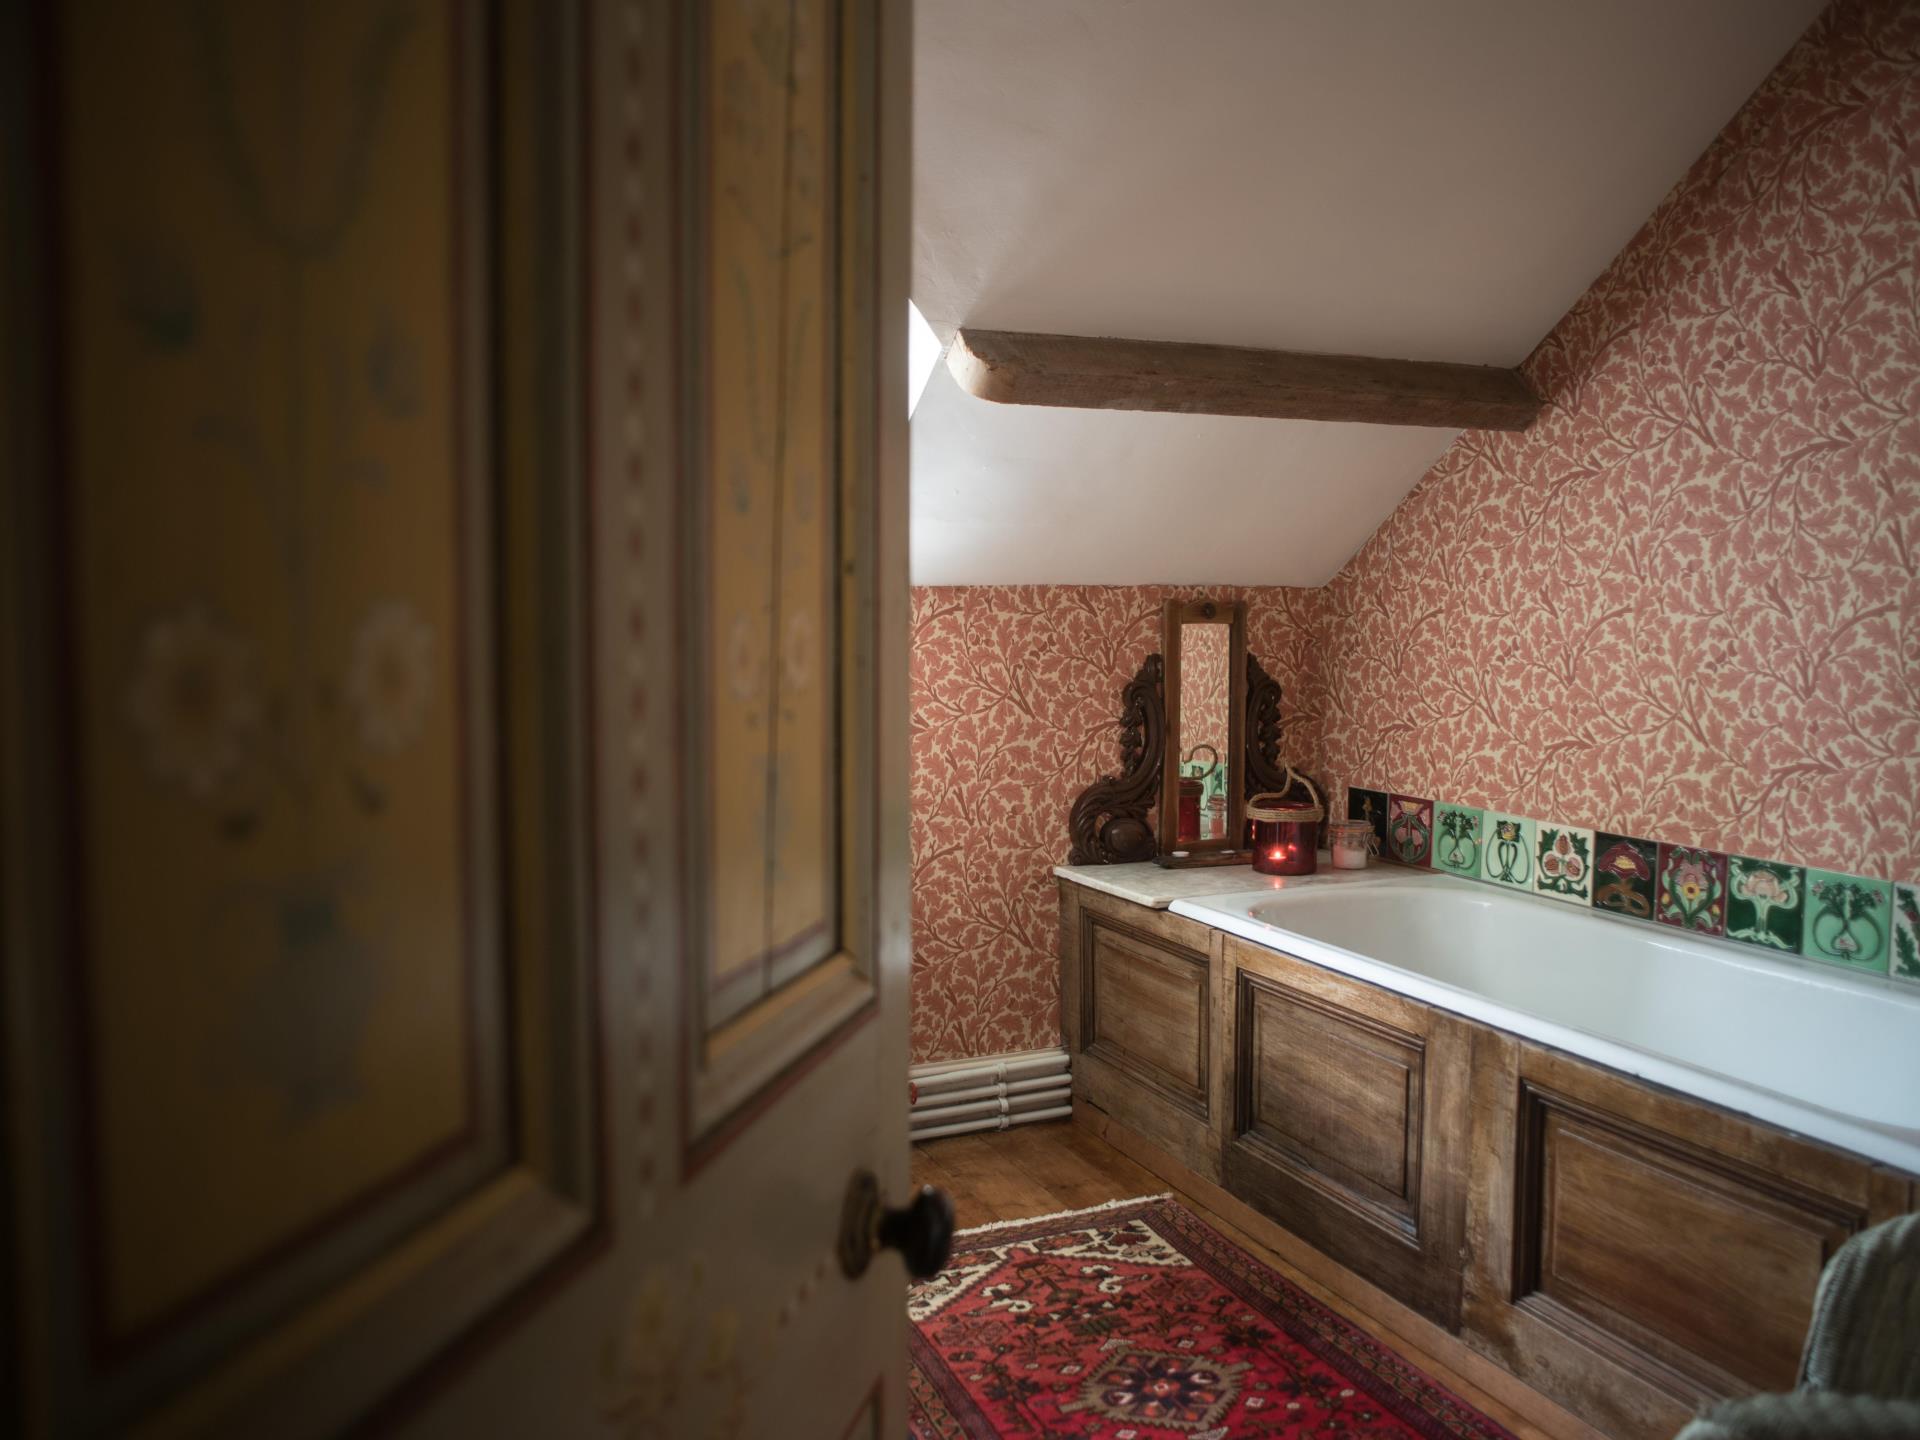 A country house bathroom like no other